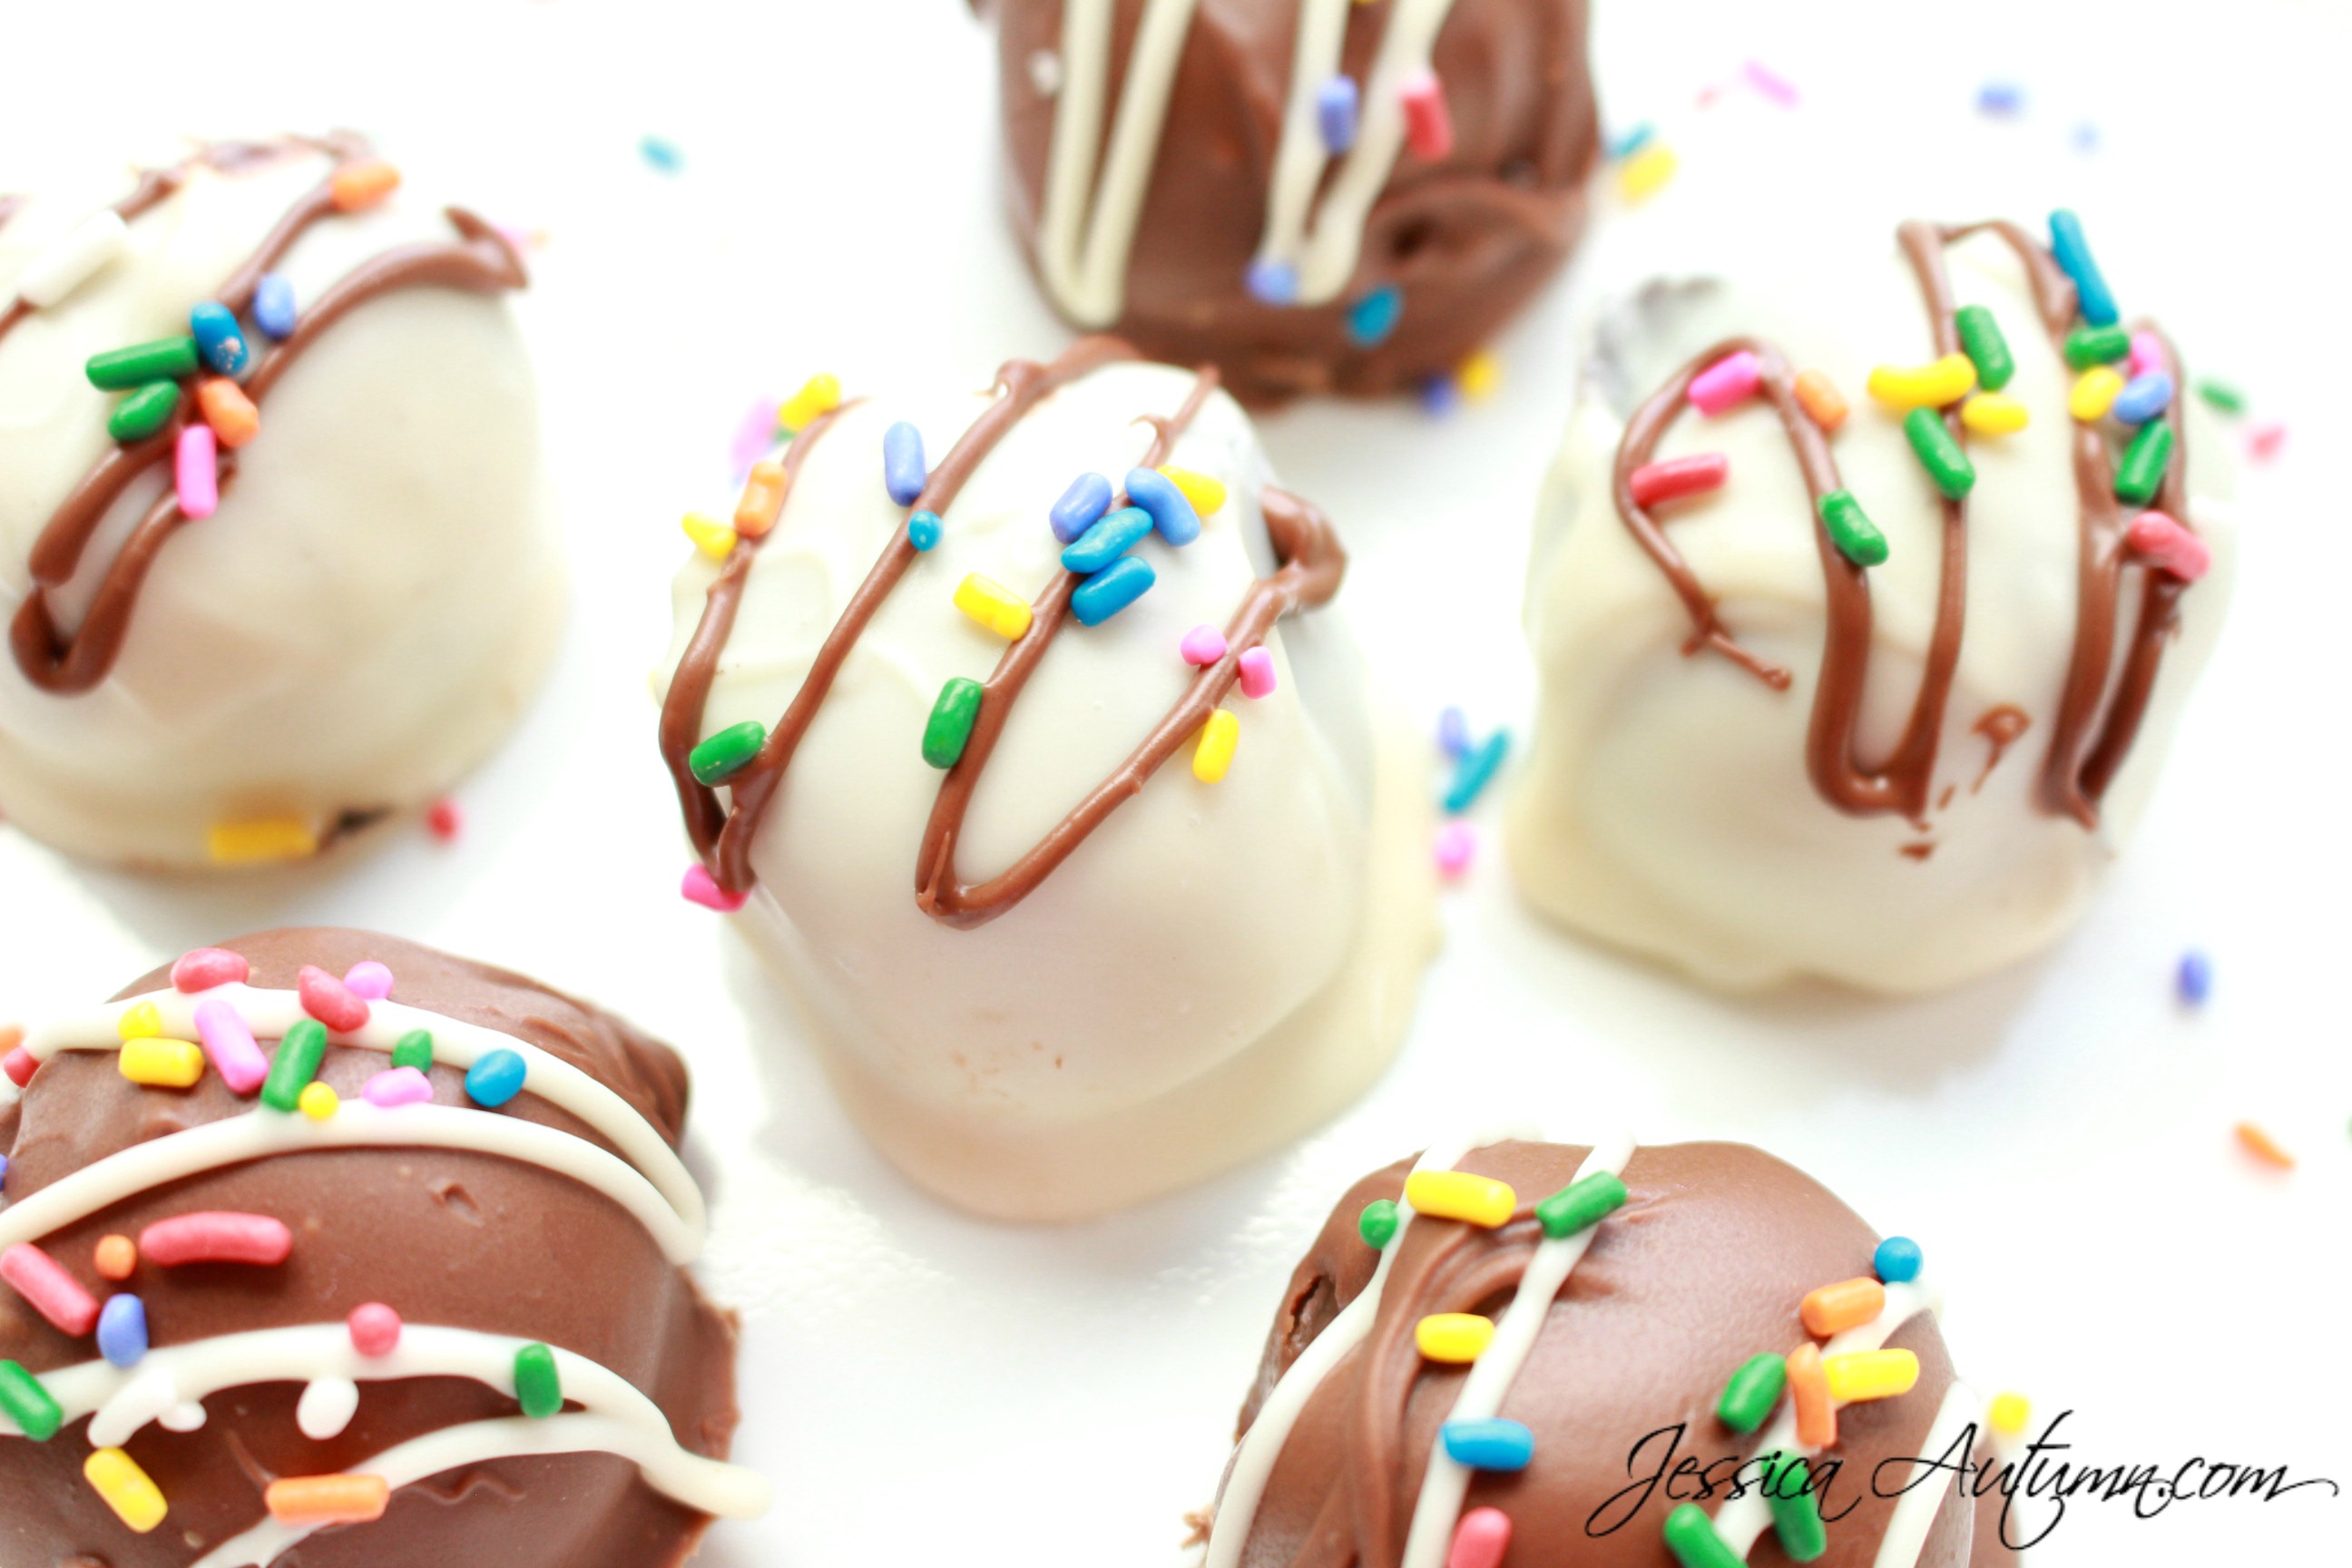 Birthday Cake Oreo Truffles {2 Secret Ingredients}. Most Oreo balls have a strong cream cheese taste. But the two secret ingredients in these truffles leave it with a cheesecake flavor. I don't know about you, but cheesecake is much better than cream cheese. Amazing recipe! 